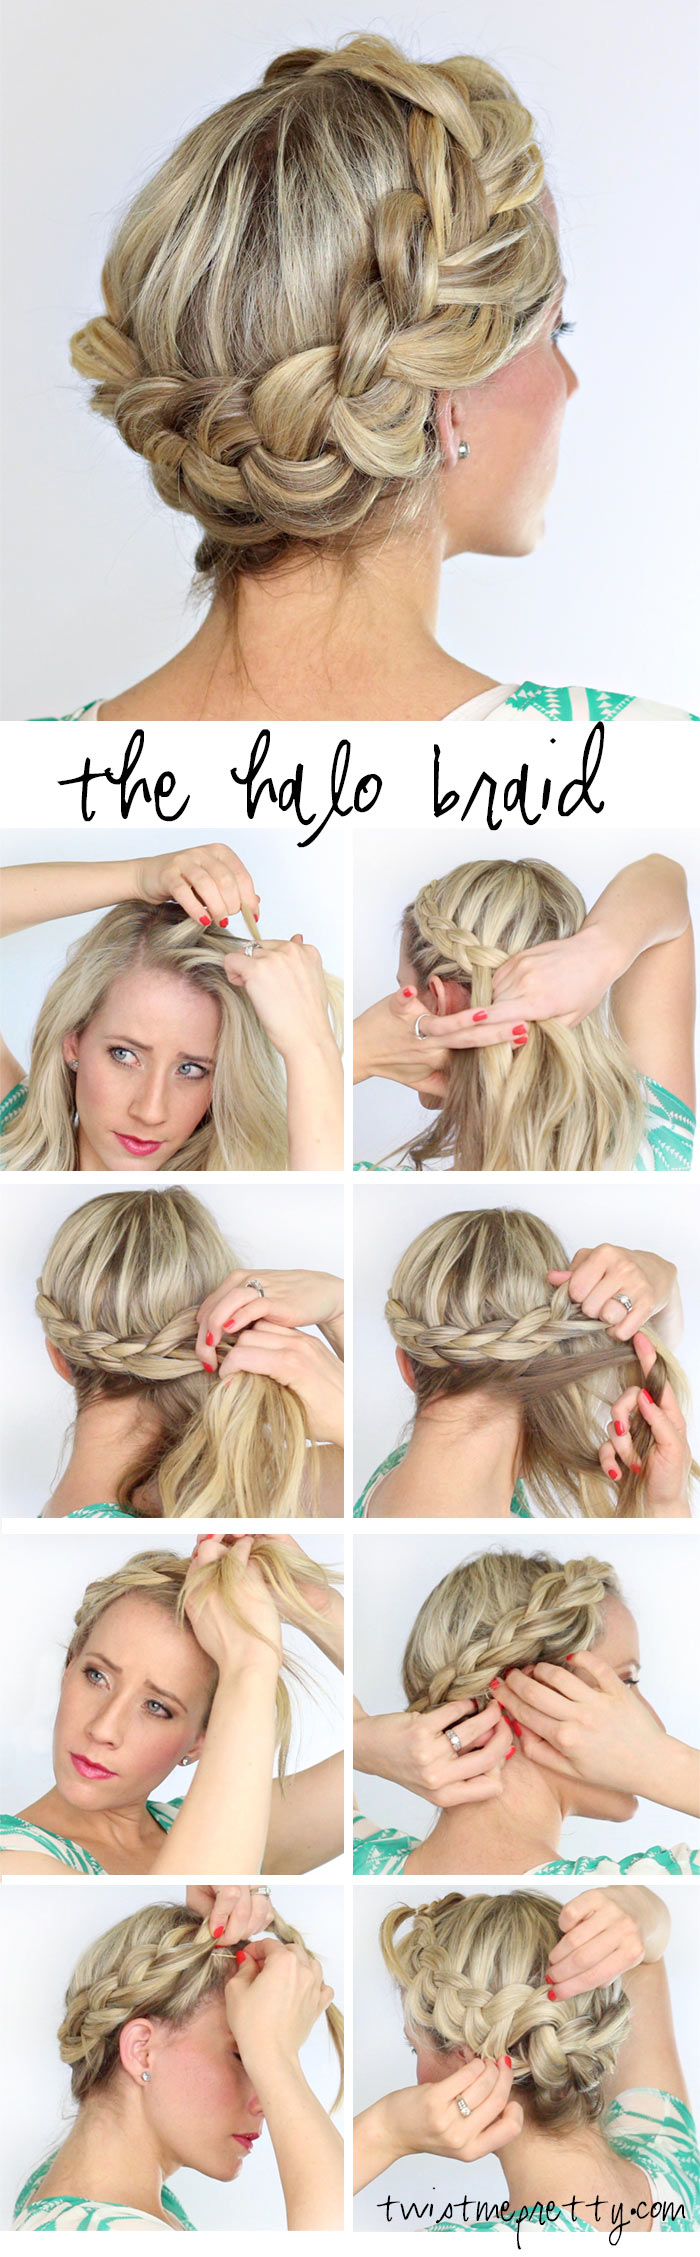 How To Do The Braided Crown - Tutorials + Looks ...